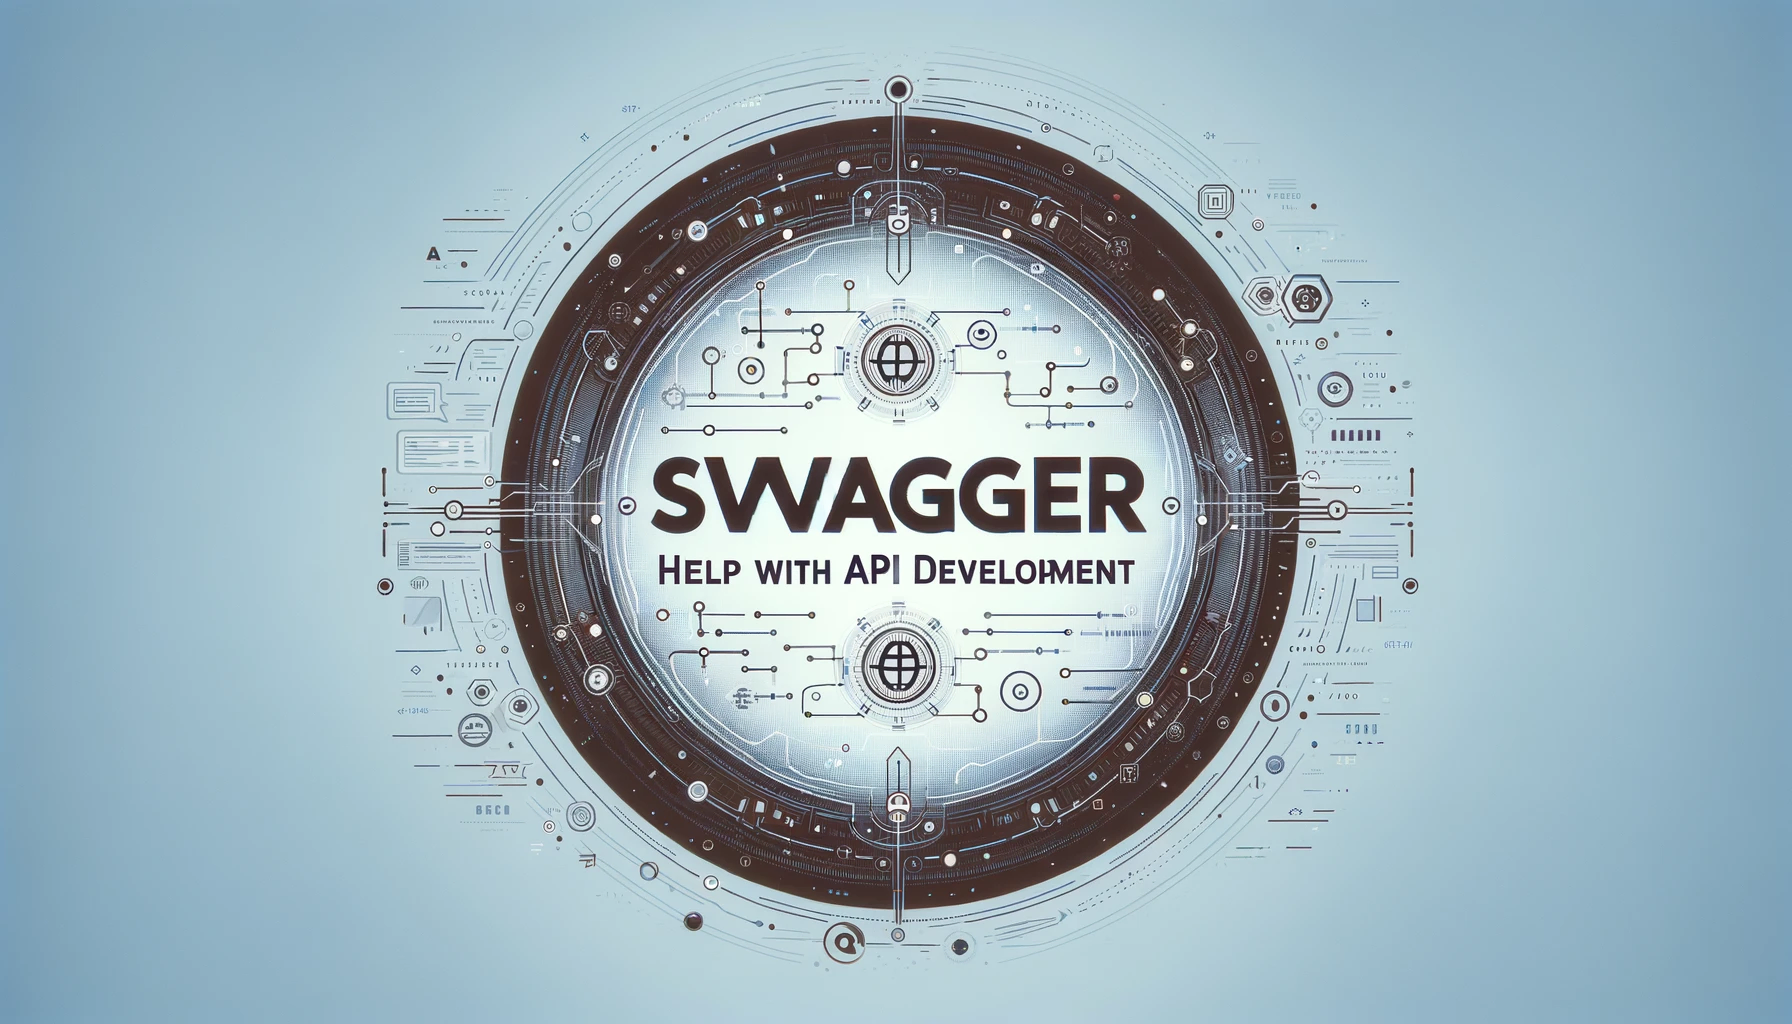 Swagger, Help with API Development